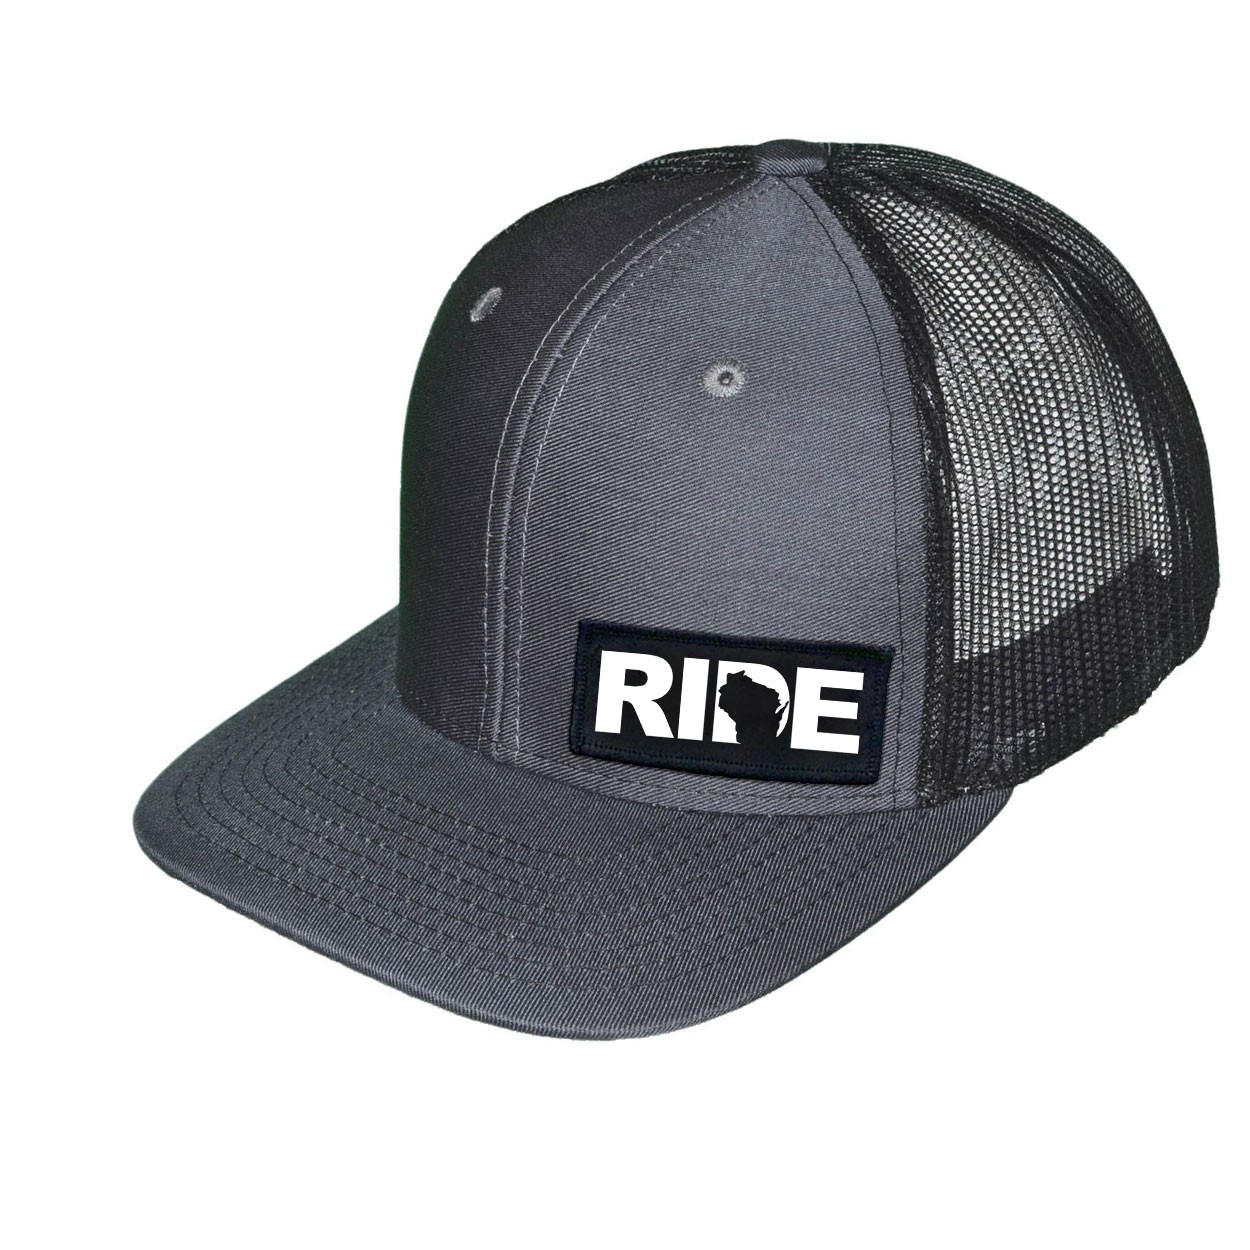 Ride Wisconsin Night Out Woven Patch Snapback Trucker Hat Gray/Black (White Logo)